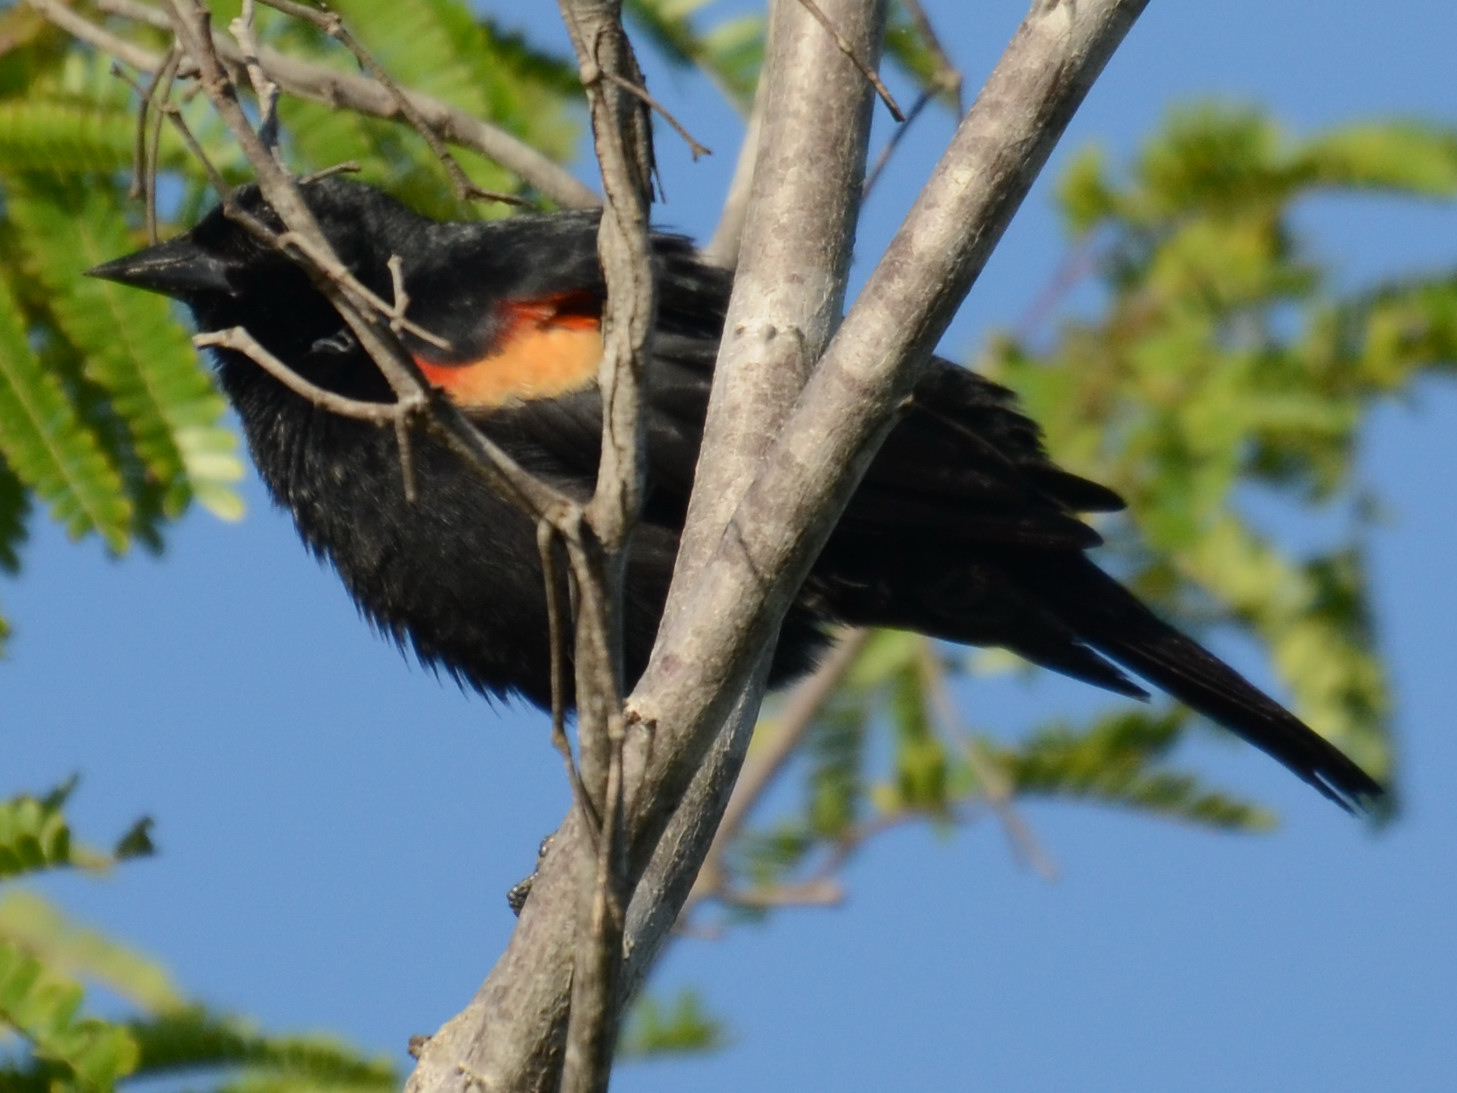 Click picture to see more Red-shouldered Blackbirds.